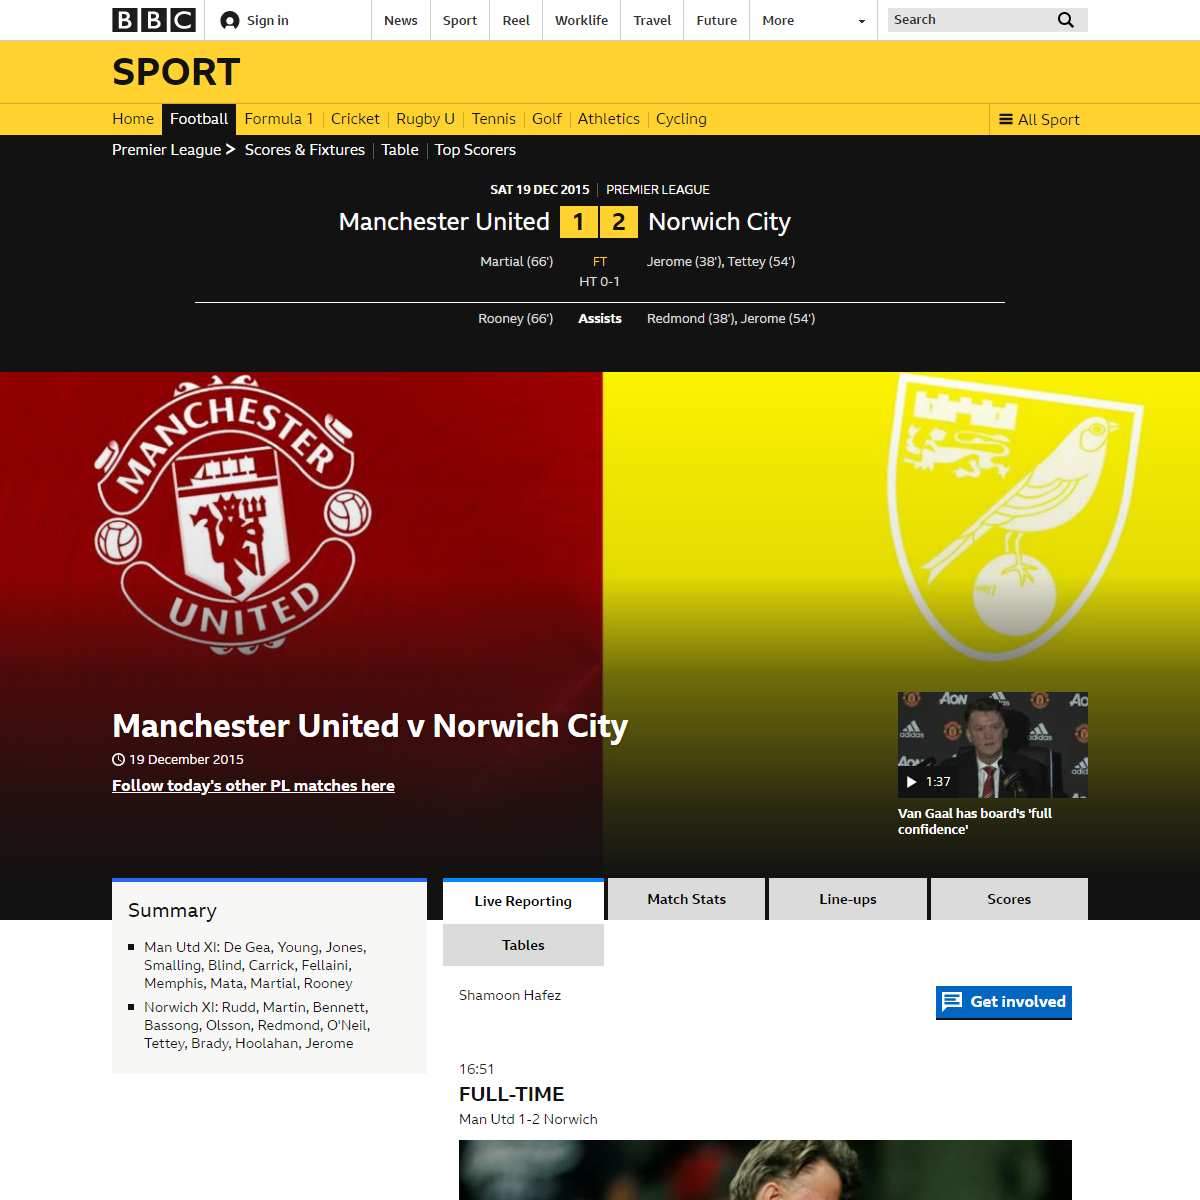 A complete backup of https://www.bbc.co.uk/sport/live/football/34478402